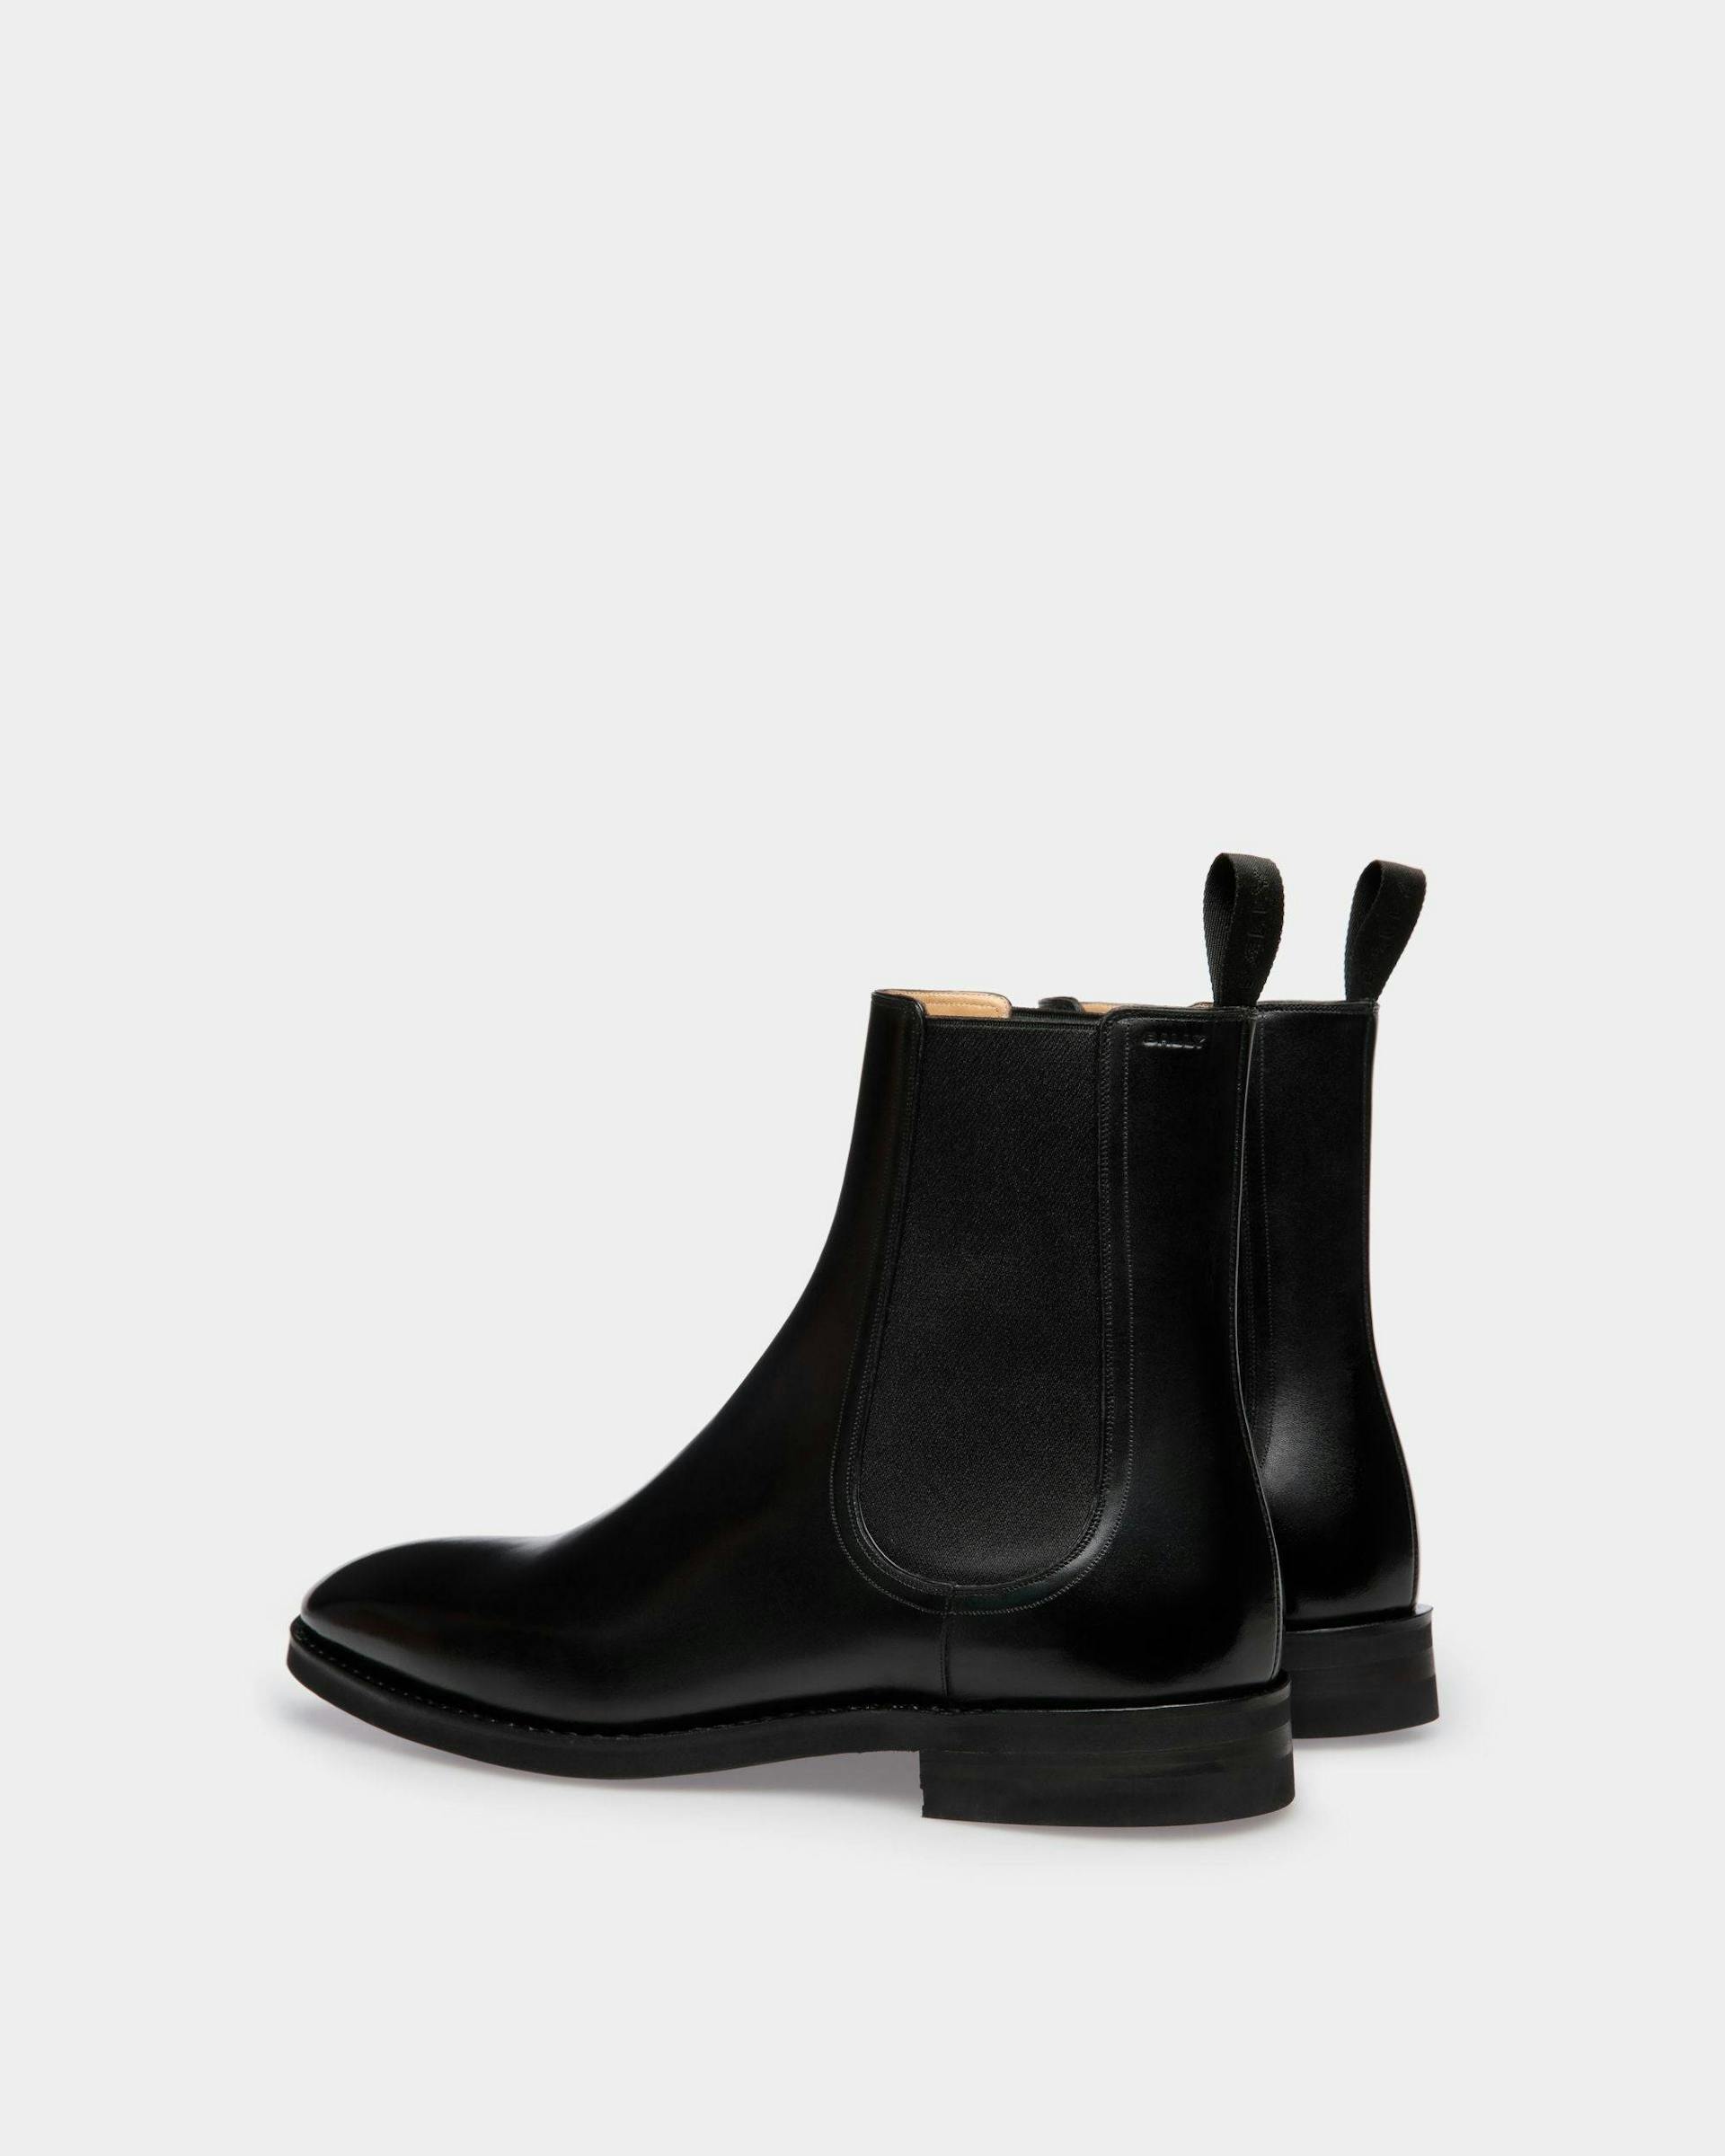 Men's Scribe Boot in Black Leather | Bally | Still Life 3/4 Back